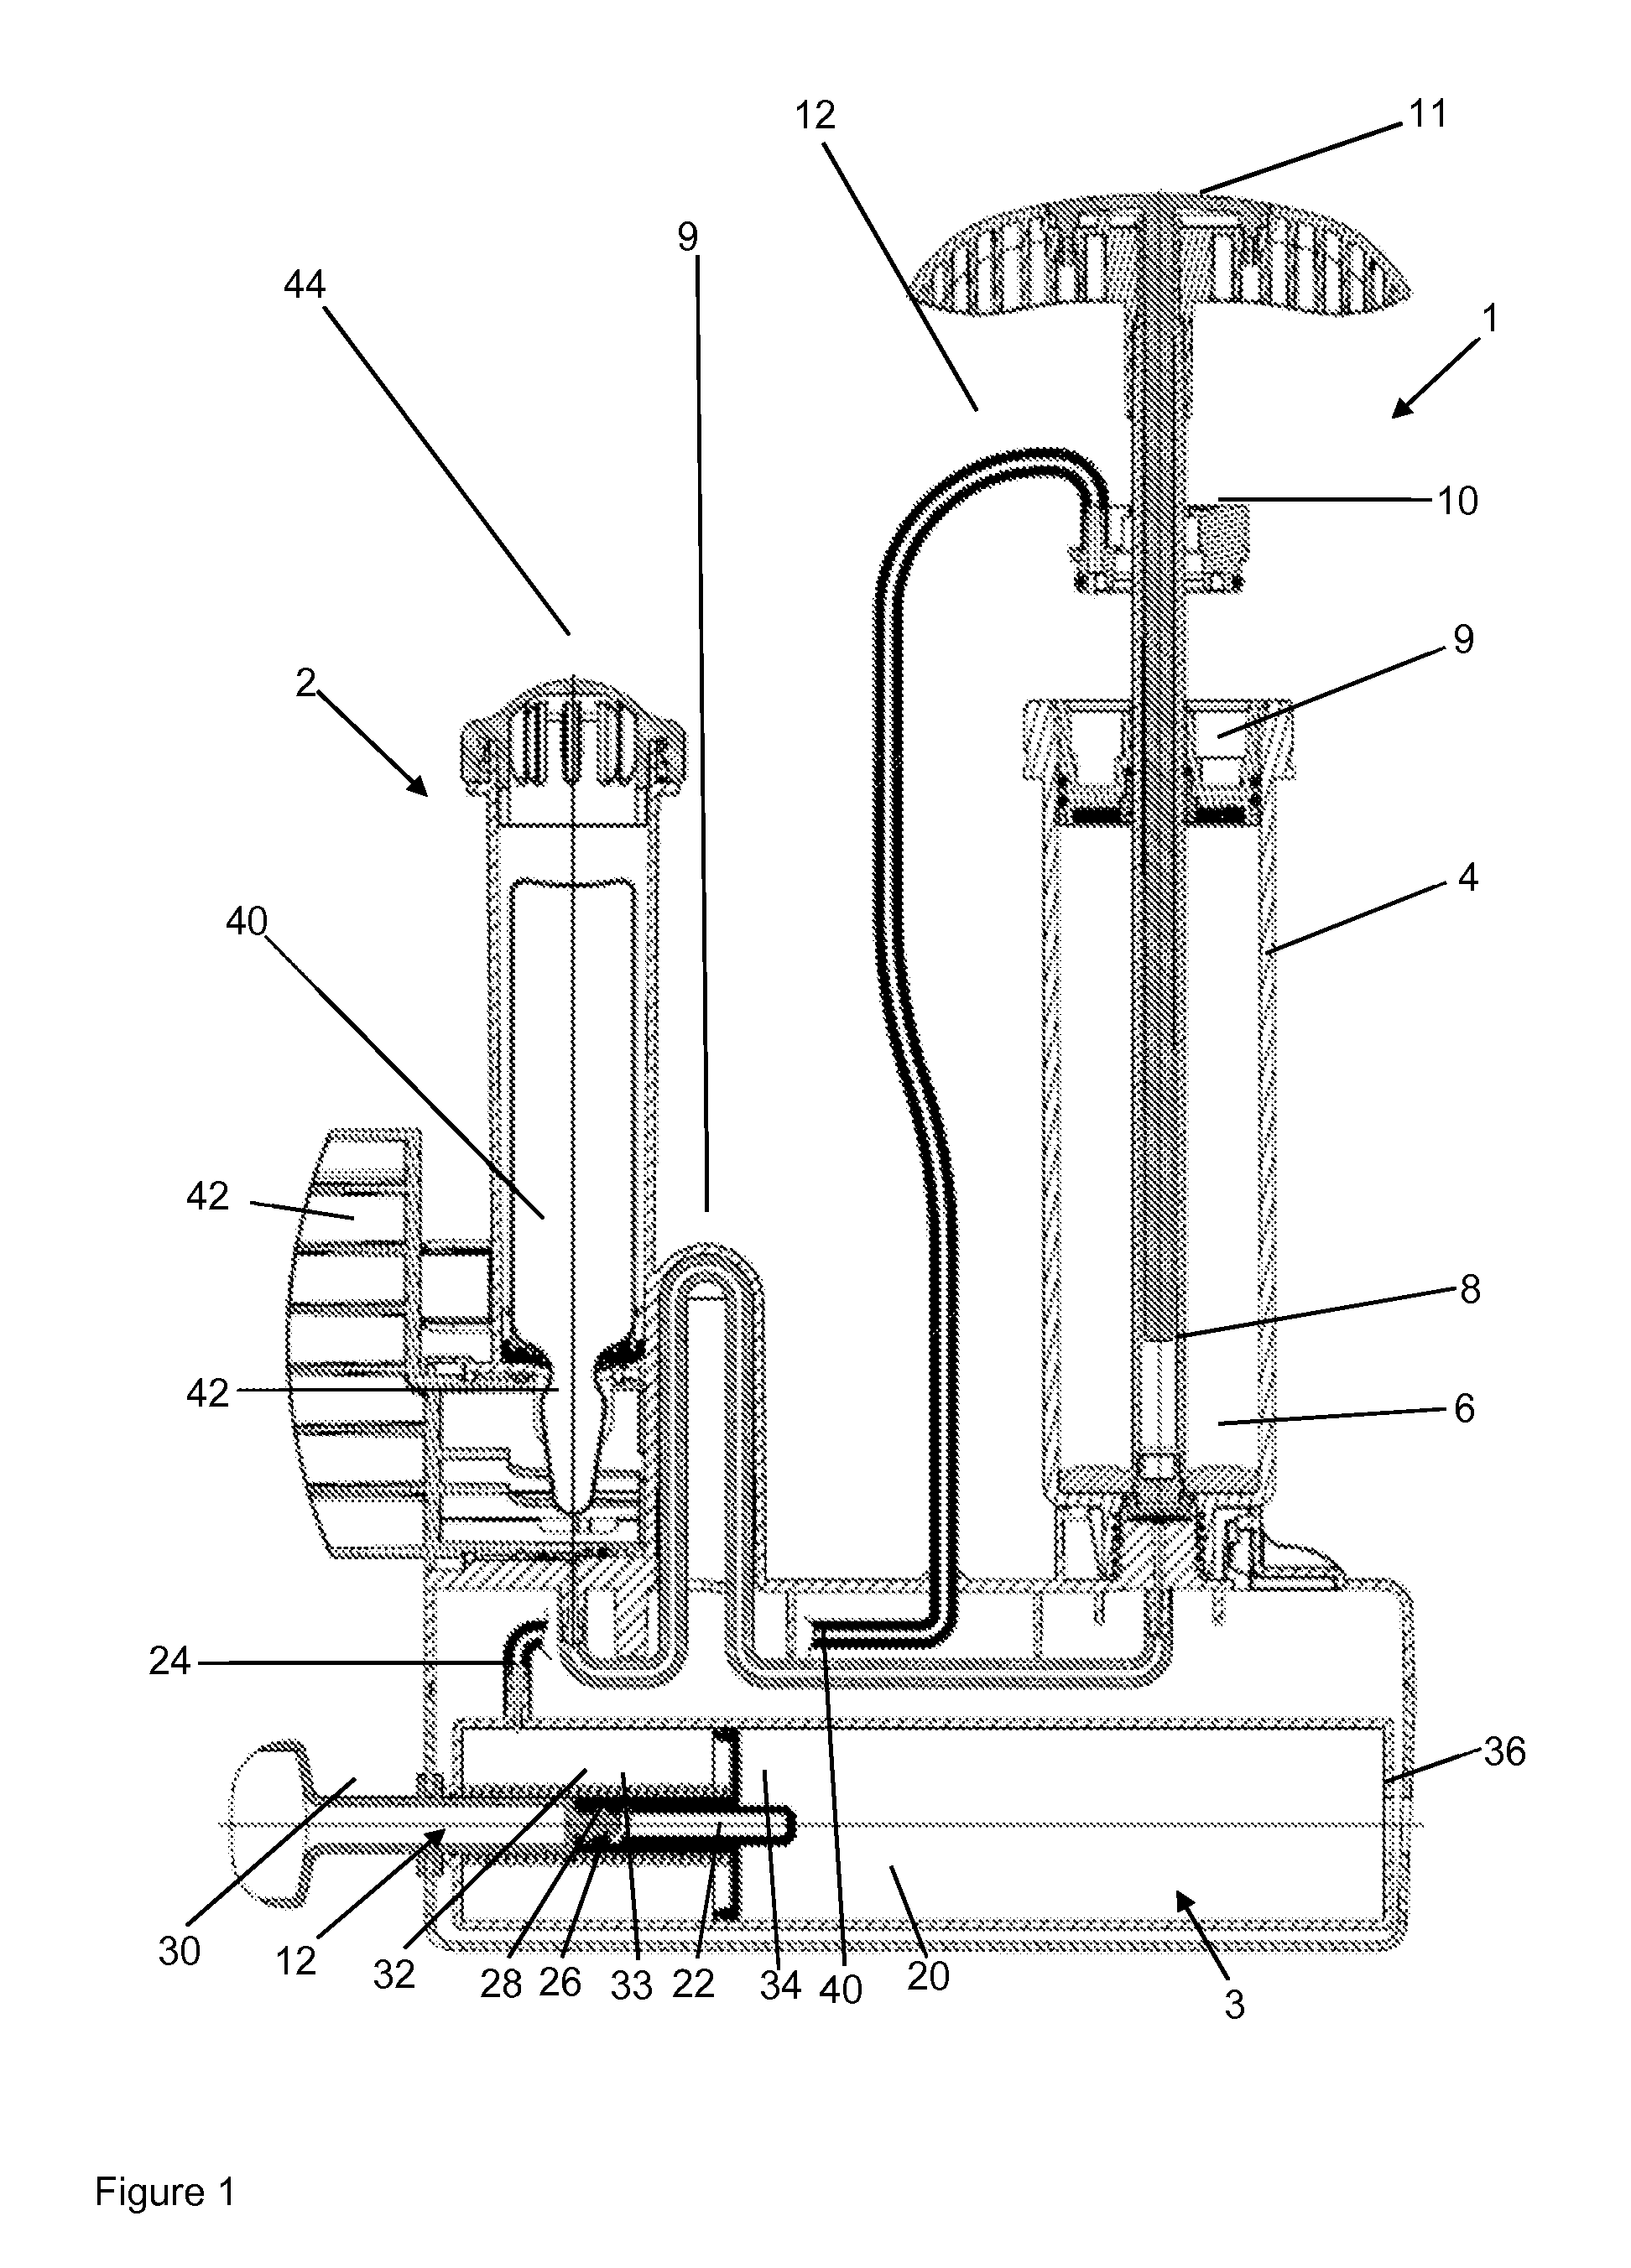 Vacuum mixing system and method for the mixing of polymethylmethacrylate bone cement